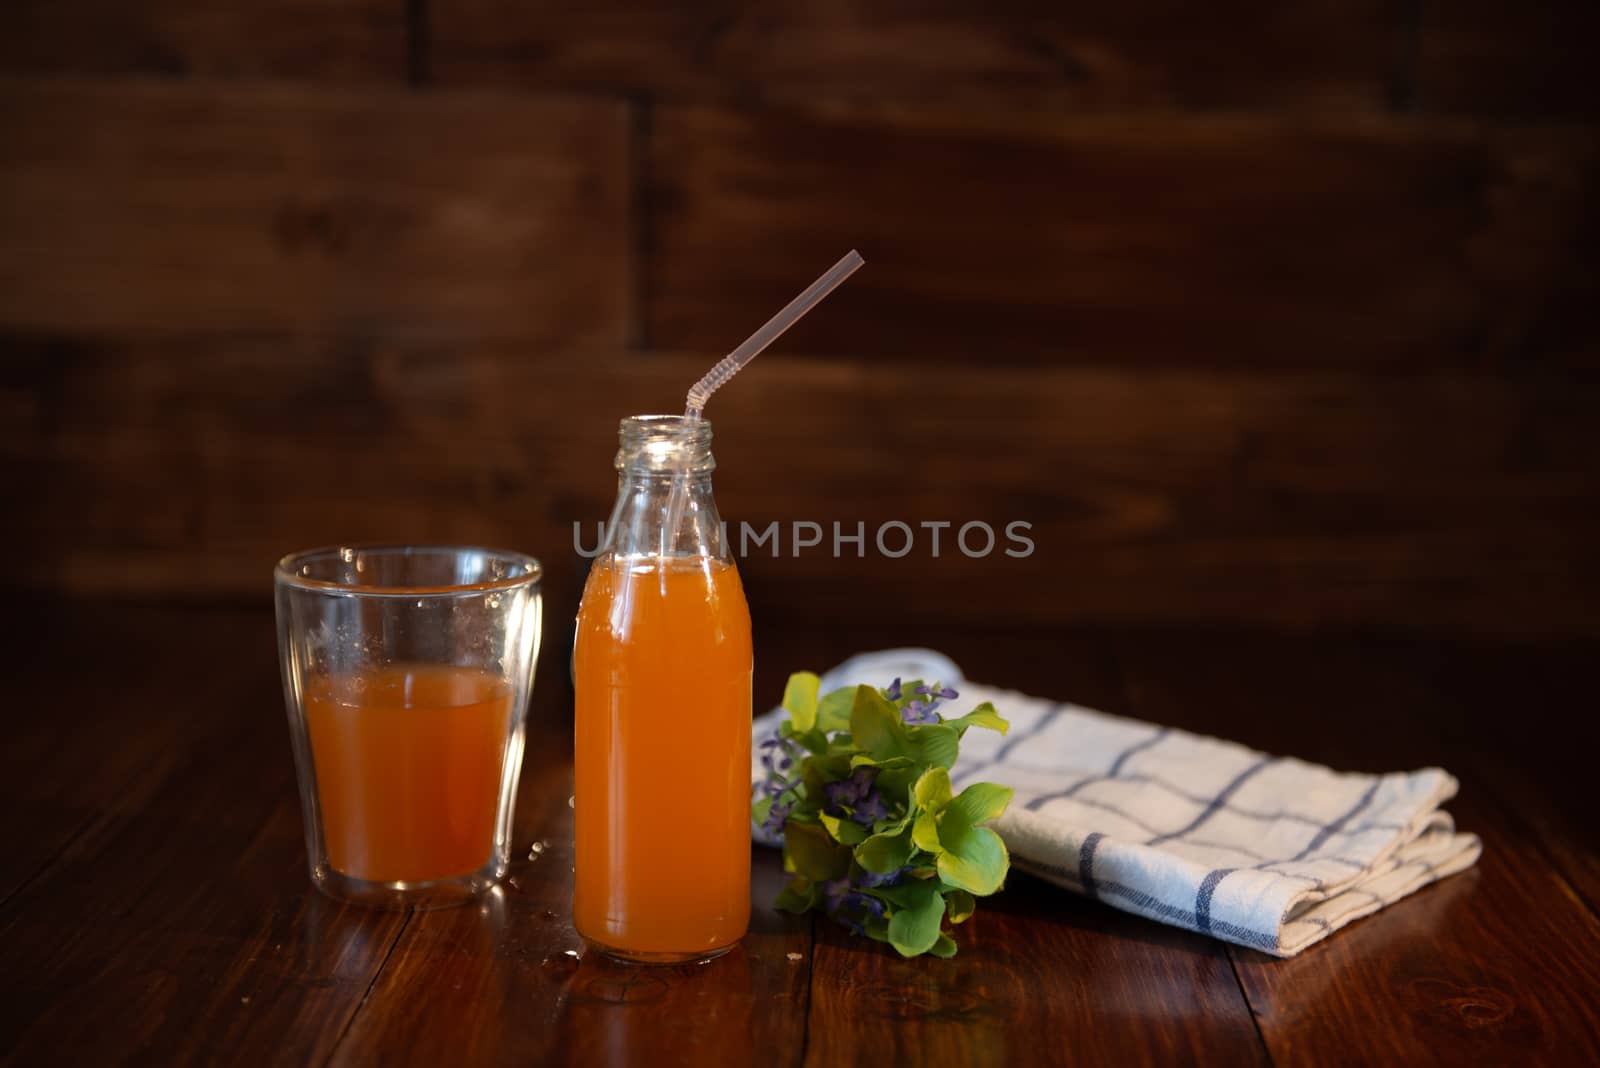 vintage bottle with juice, straw, flowers and towel on wooden table.